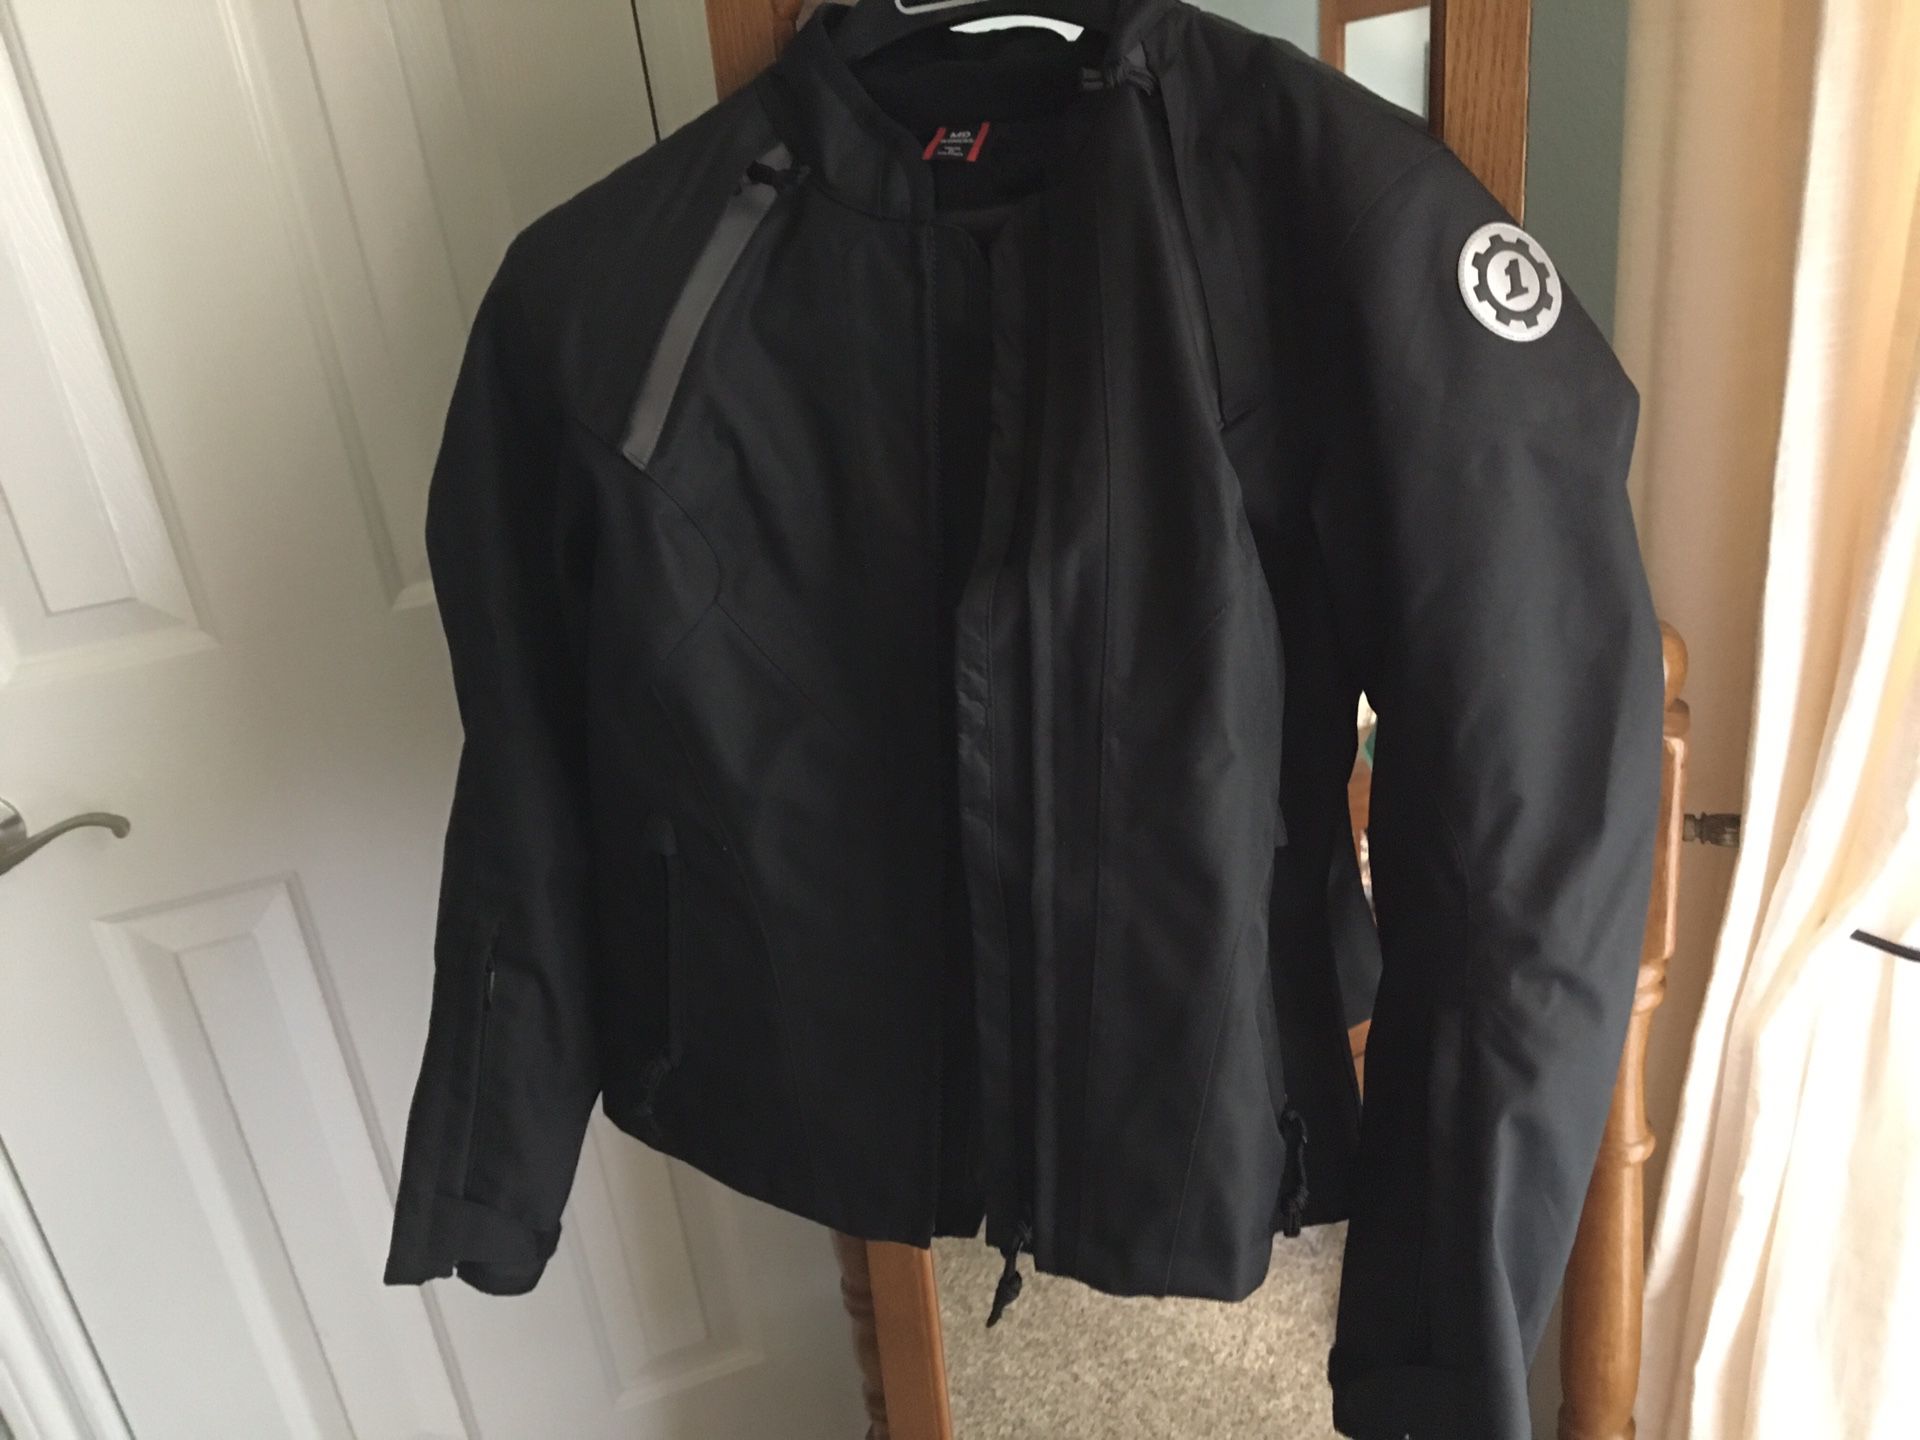 First Gear (W) Motorcycle Riding Jacket